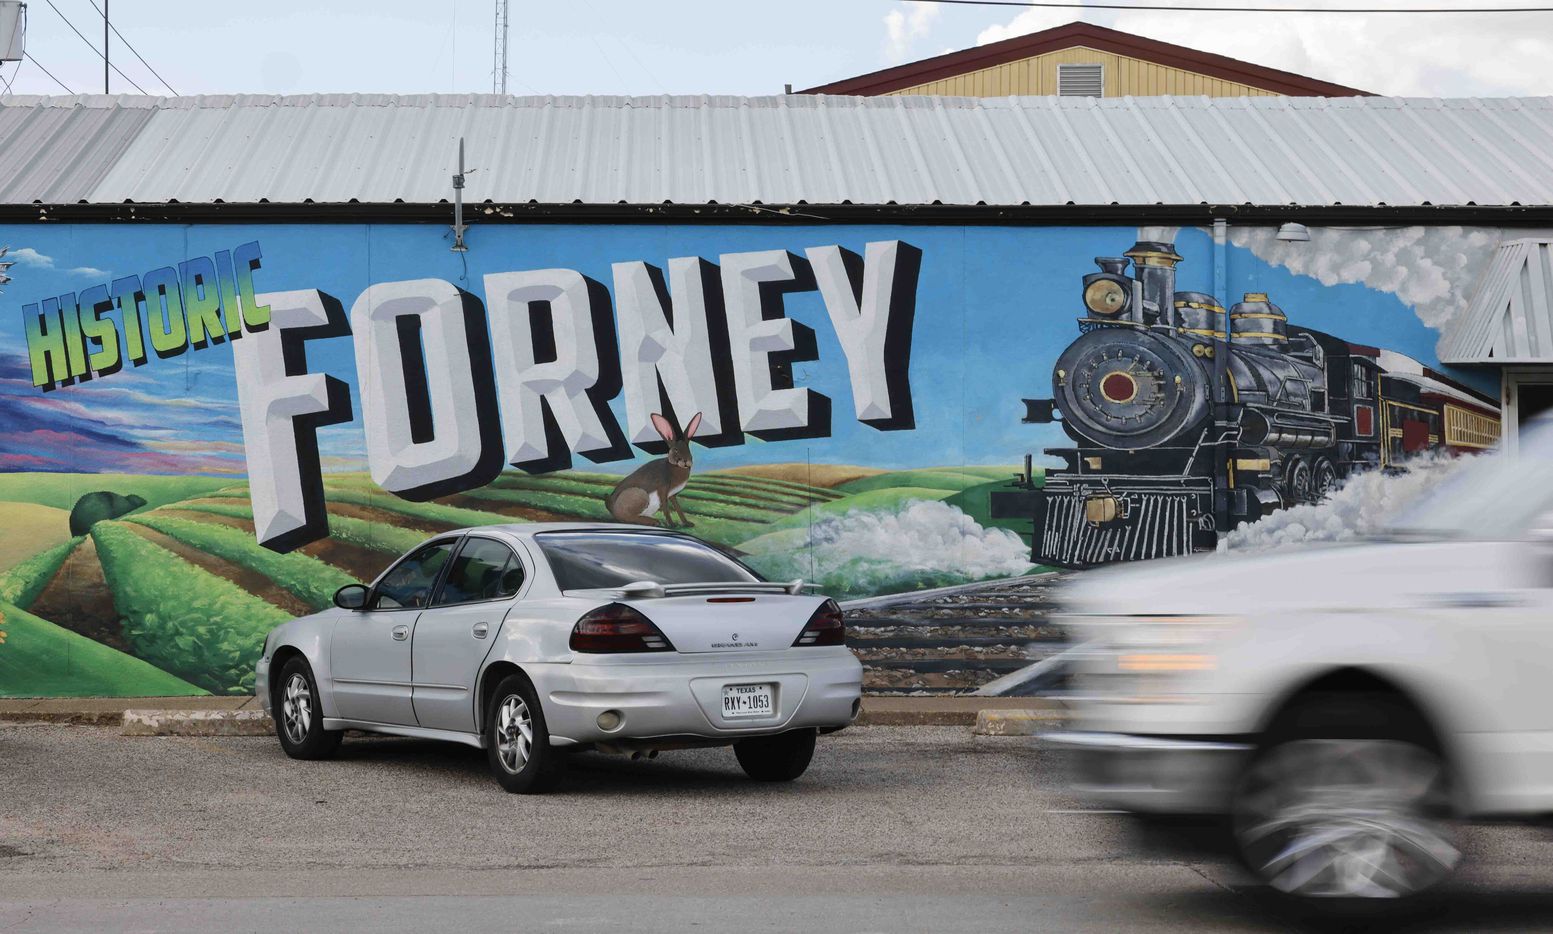 Traffic passes by the sign in downtown Forney.